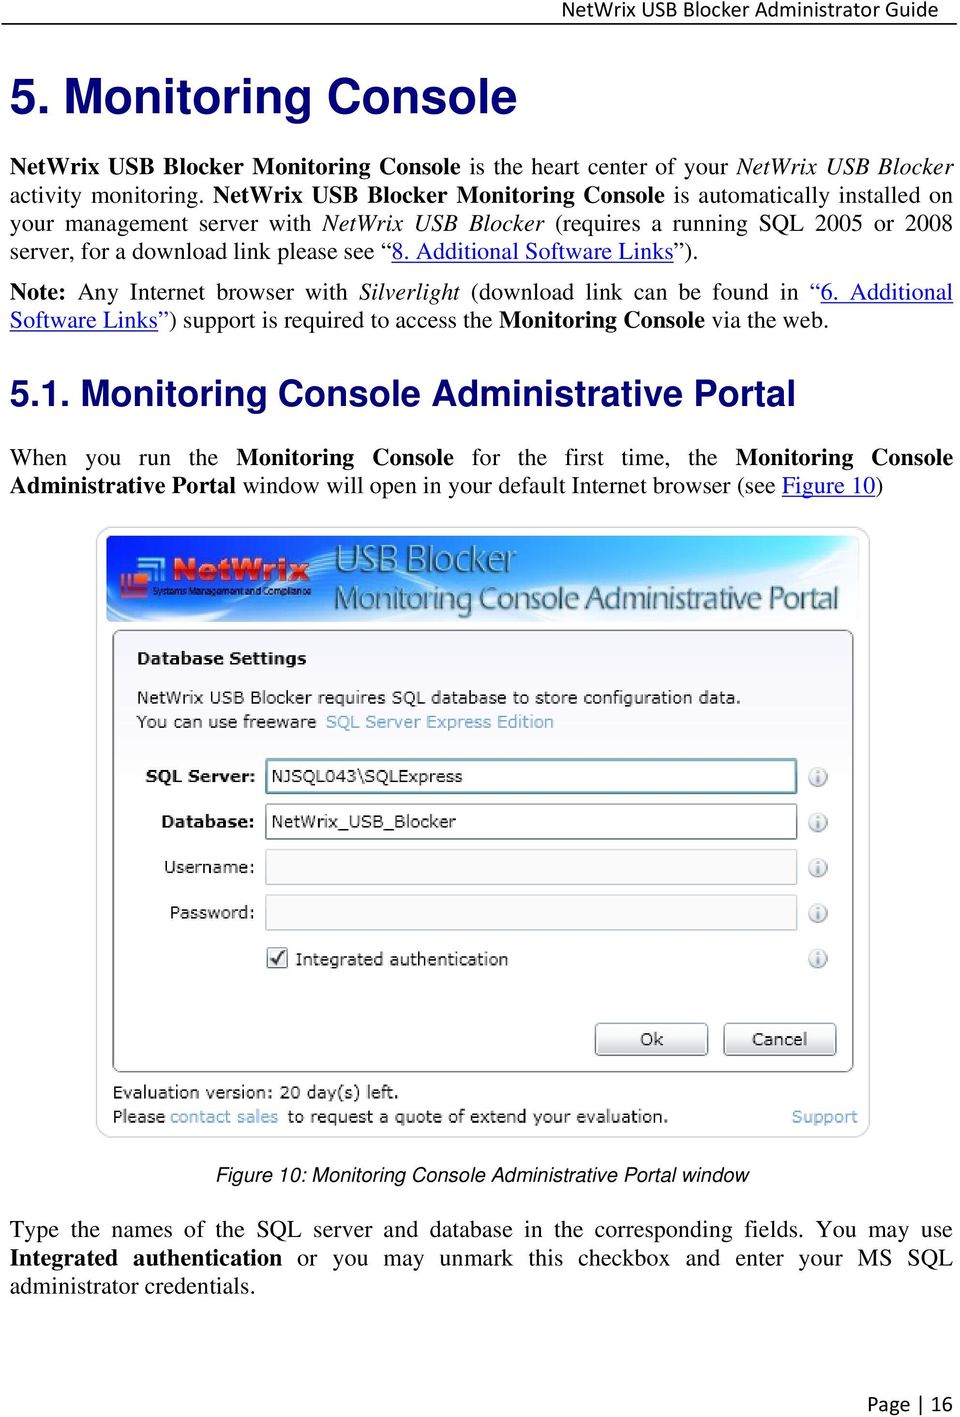 Additional Software Links ). Note: Any Internet browser with Silverlight (download link can be found in 6. Additional Software Links ) support is required to access the Monitoring Console via the web.